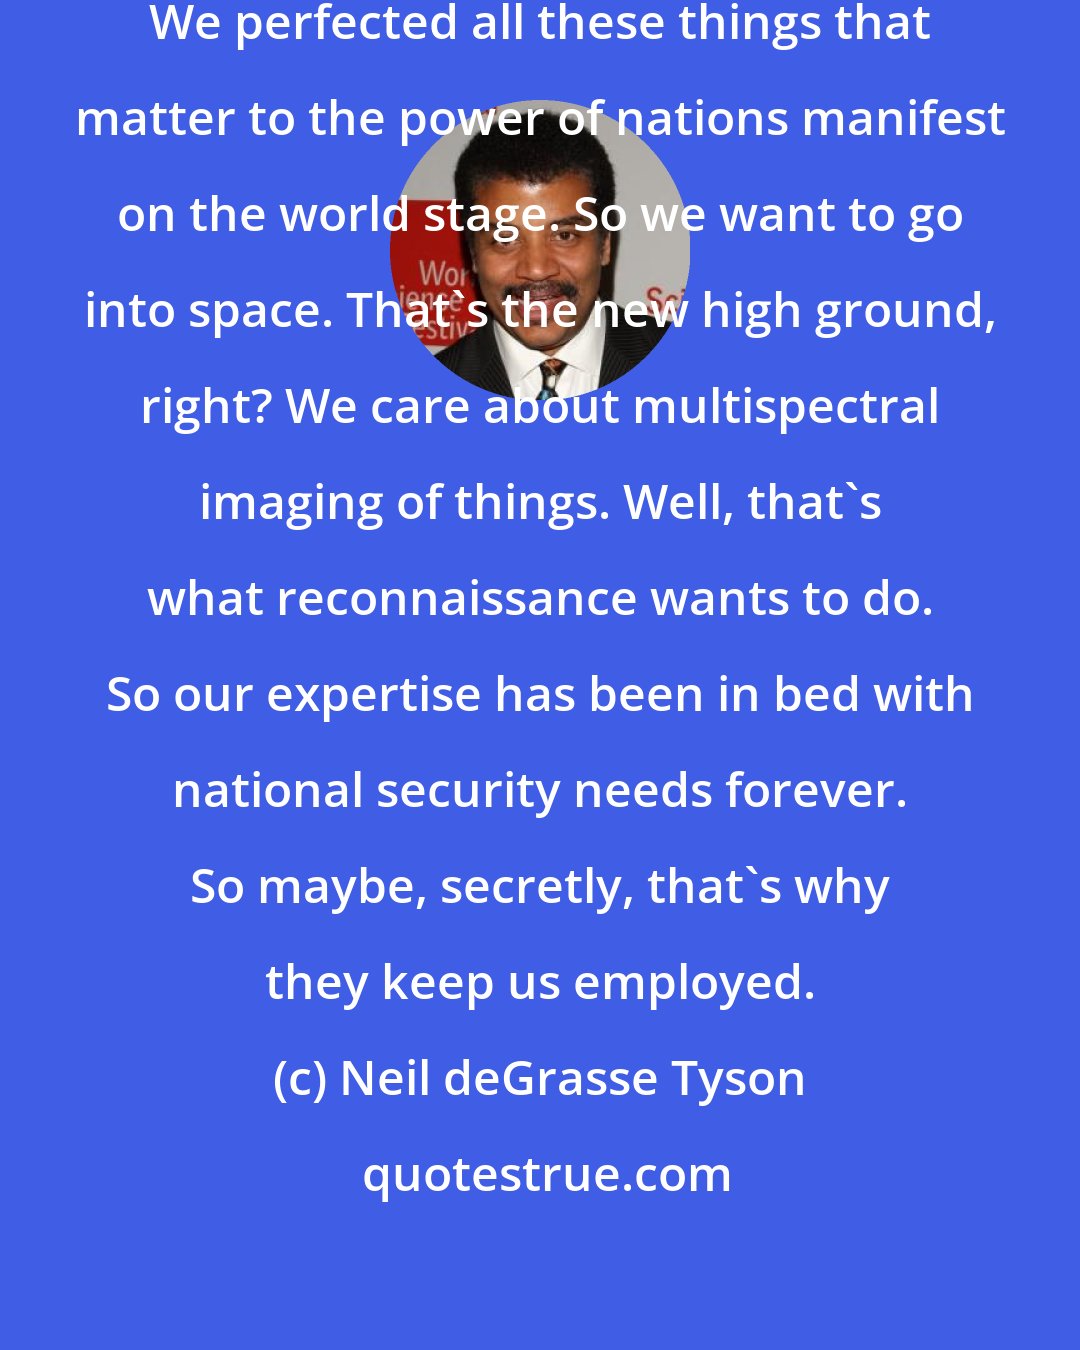 Neil deGrasse Tyson: Astrophysicists perfected navigation. We perfected all these things that matter to the power of nations manifest on the world stage. So we want to go into space. That's the new high ground, right? We care about multispectral imaging of things. Well, that's what reconnaissance wants to do. So our expertise has been in bed with national security needs forever. So maybe, secretly, that's why they keep us employed.